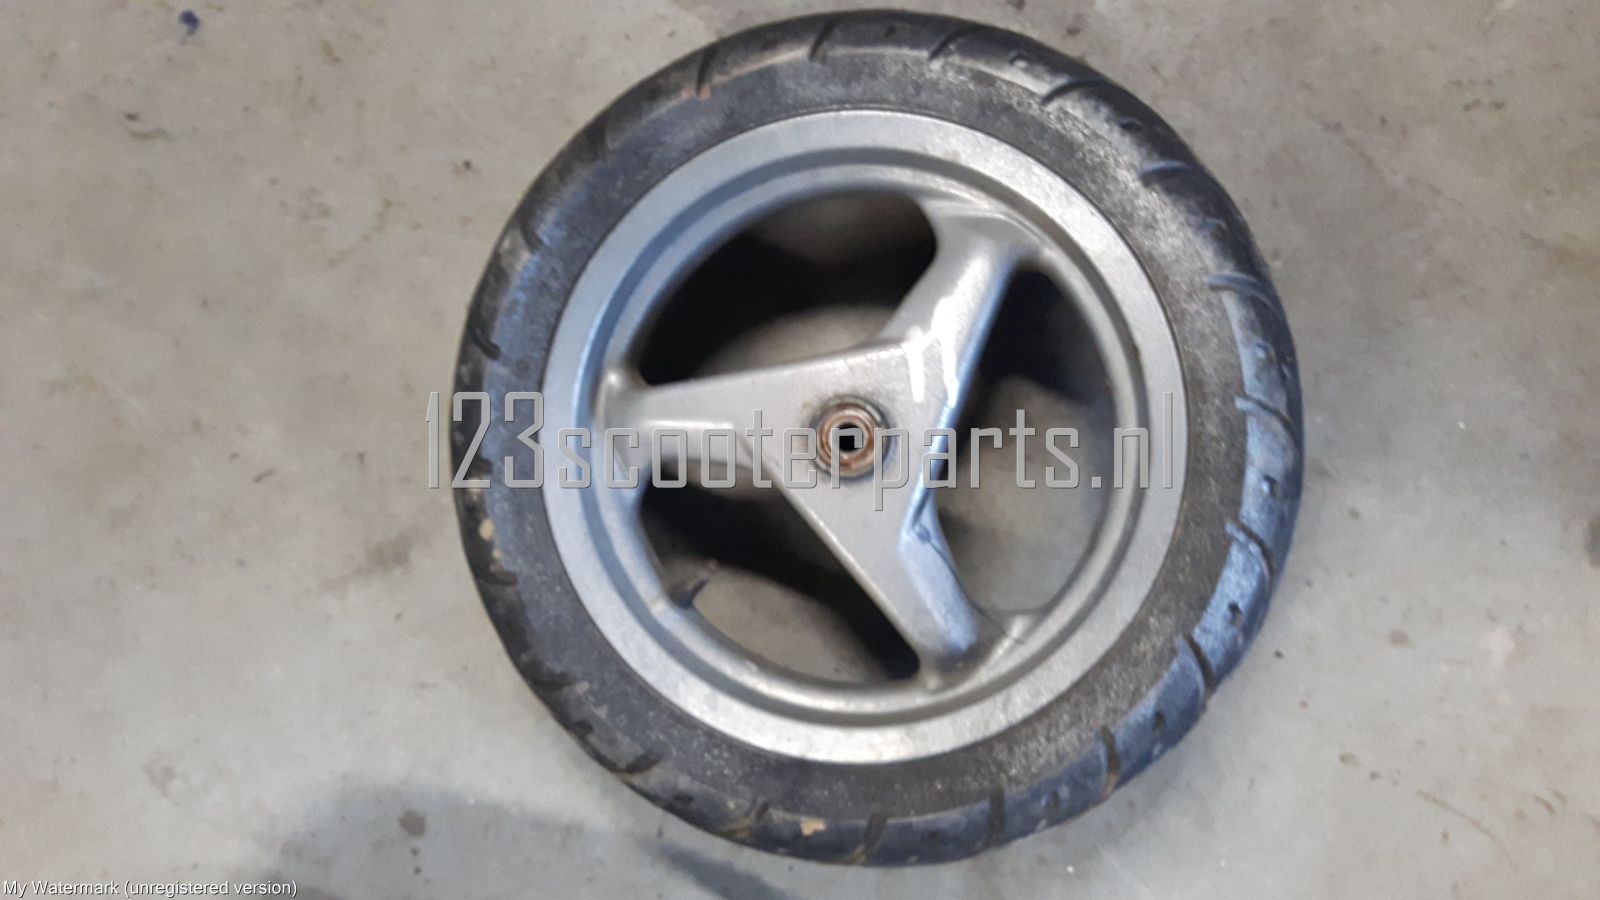 Peugeot Vivacity front wheel and tire